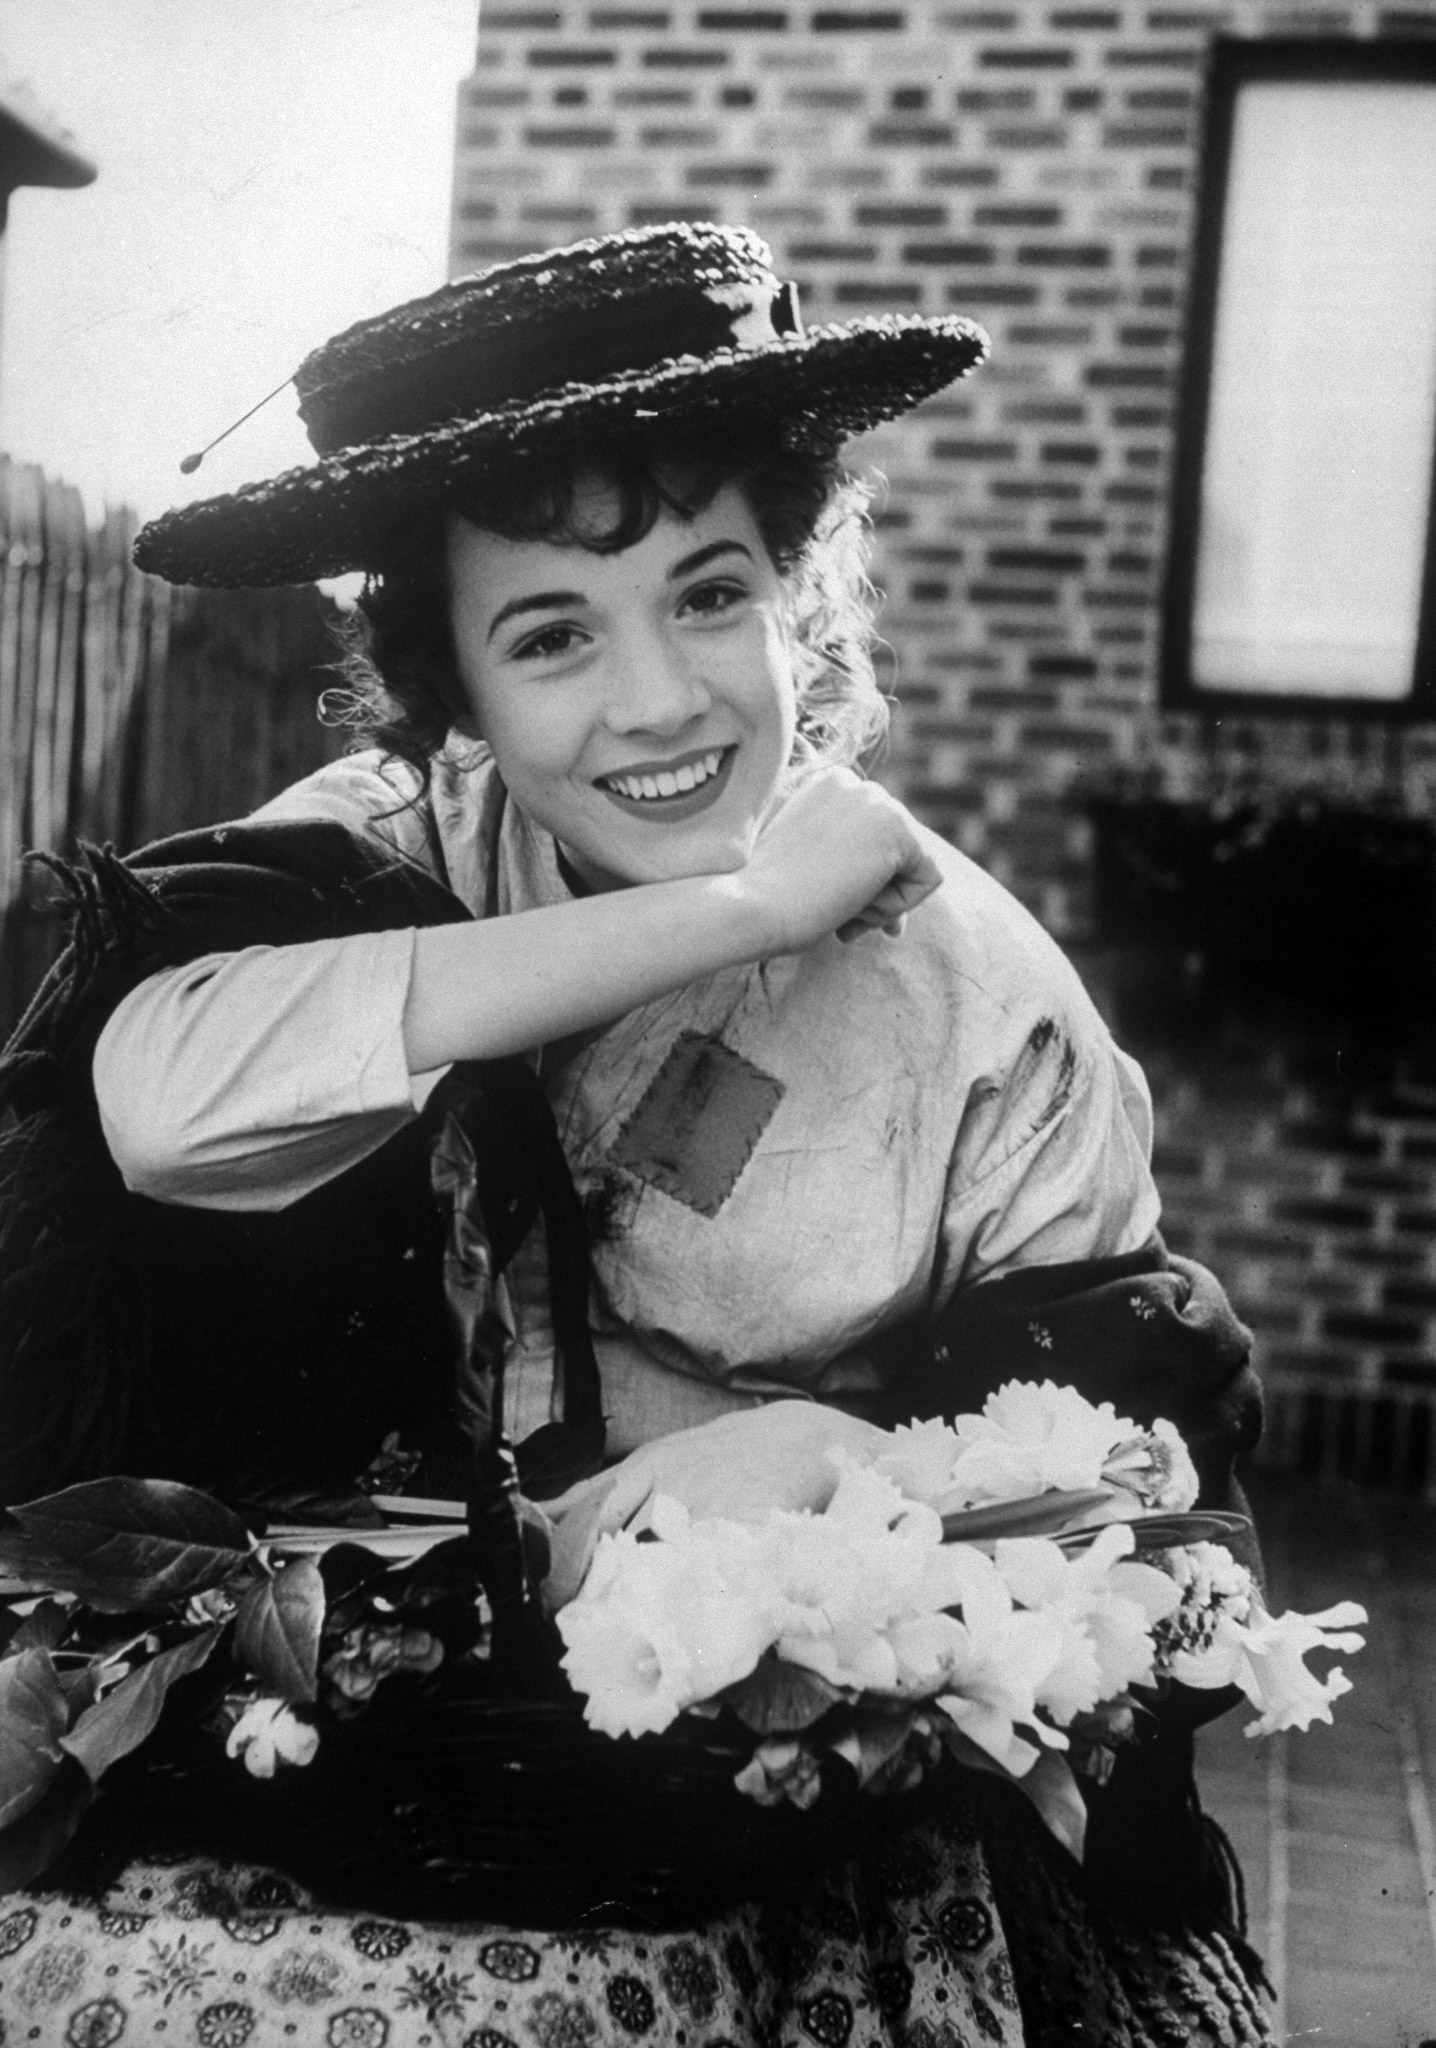 Scene from the play, My Fair Lady with Julie Andrews as Eliza Doolittle.